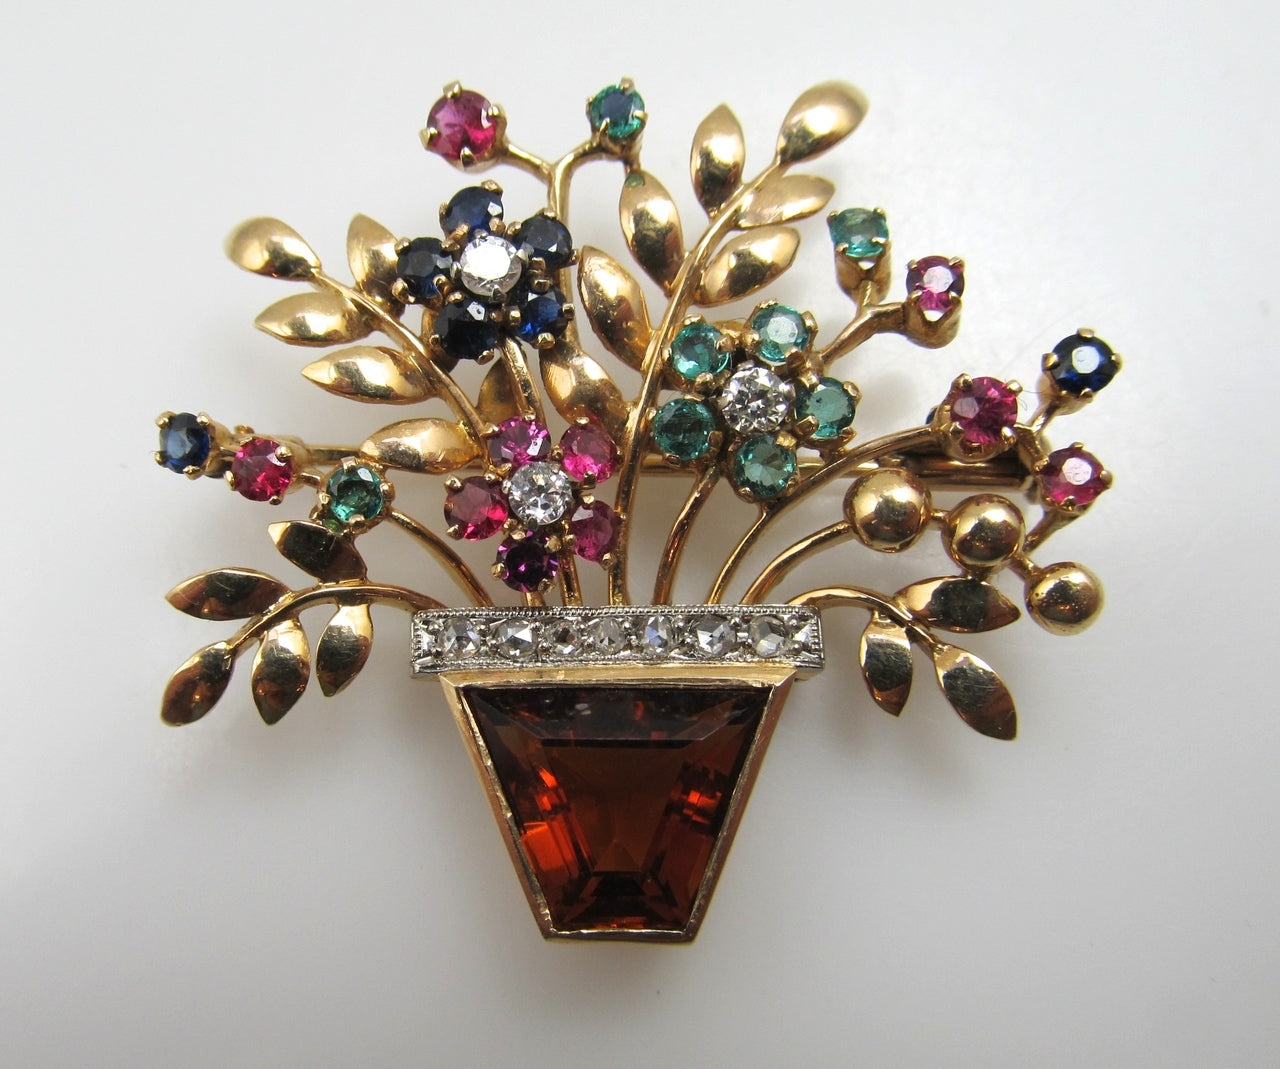 14k Rose Gold Flower Basket Pin With A Citrine, Diamonds, Emeralds, Rubies And Sapphires, Circa 1940